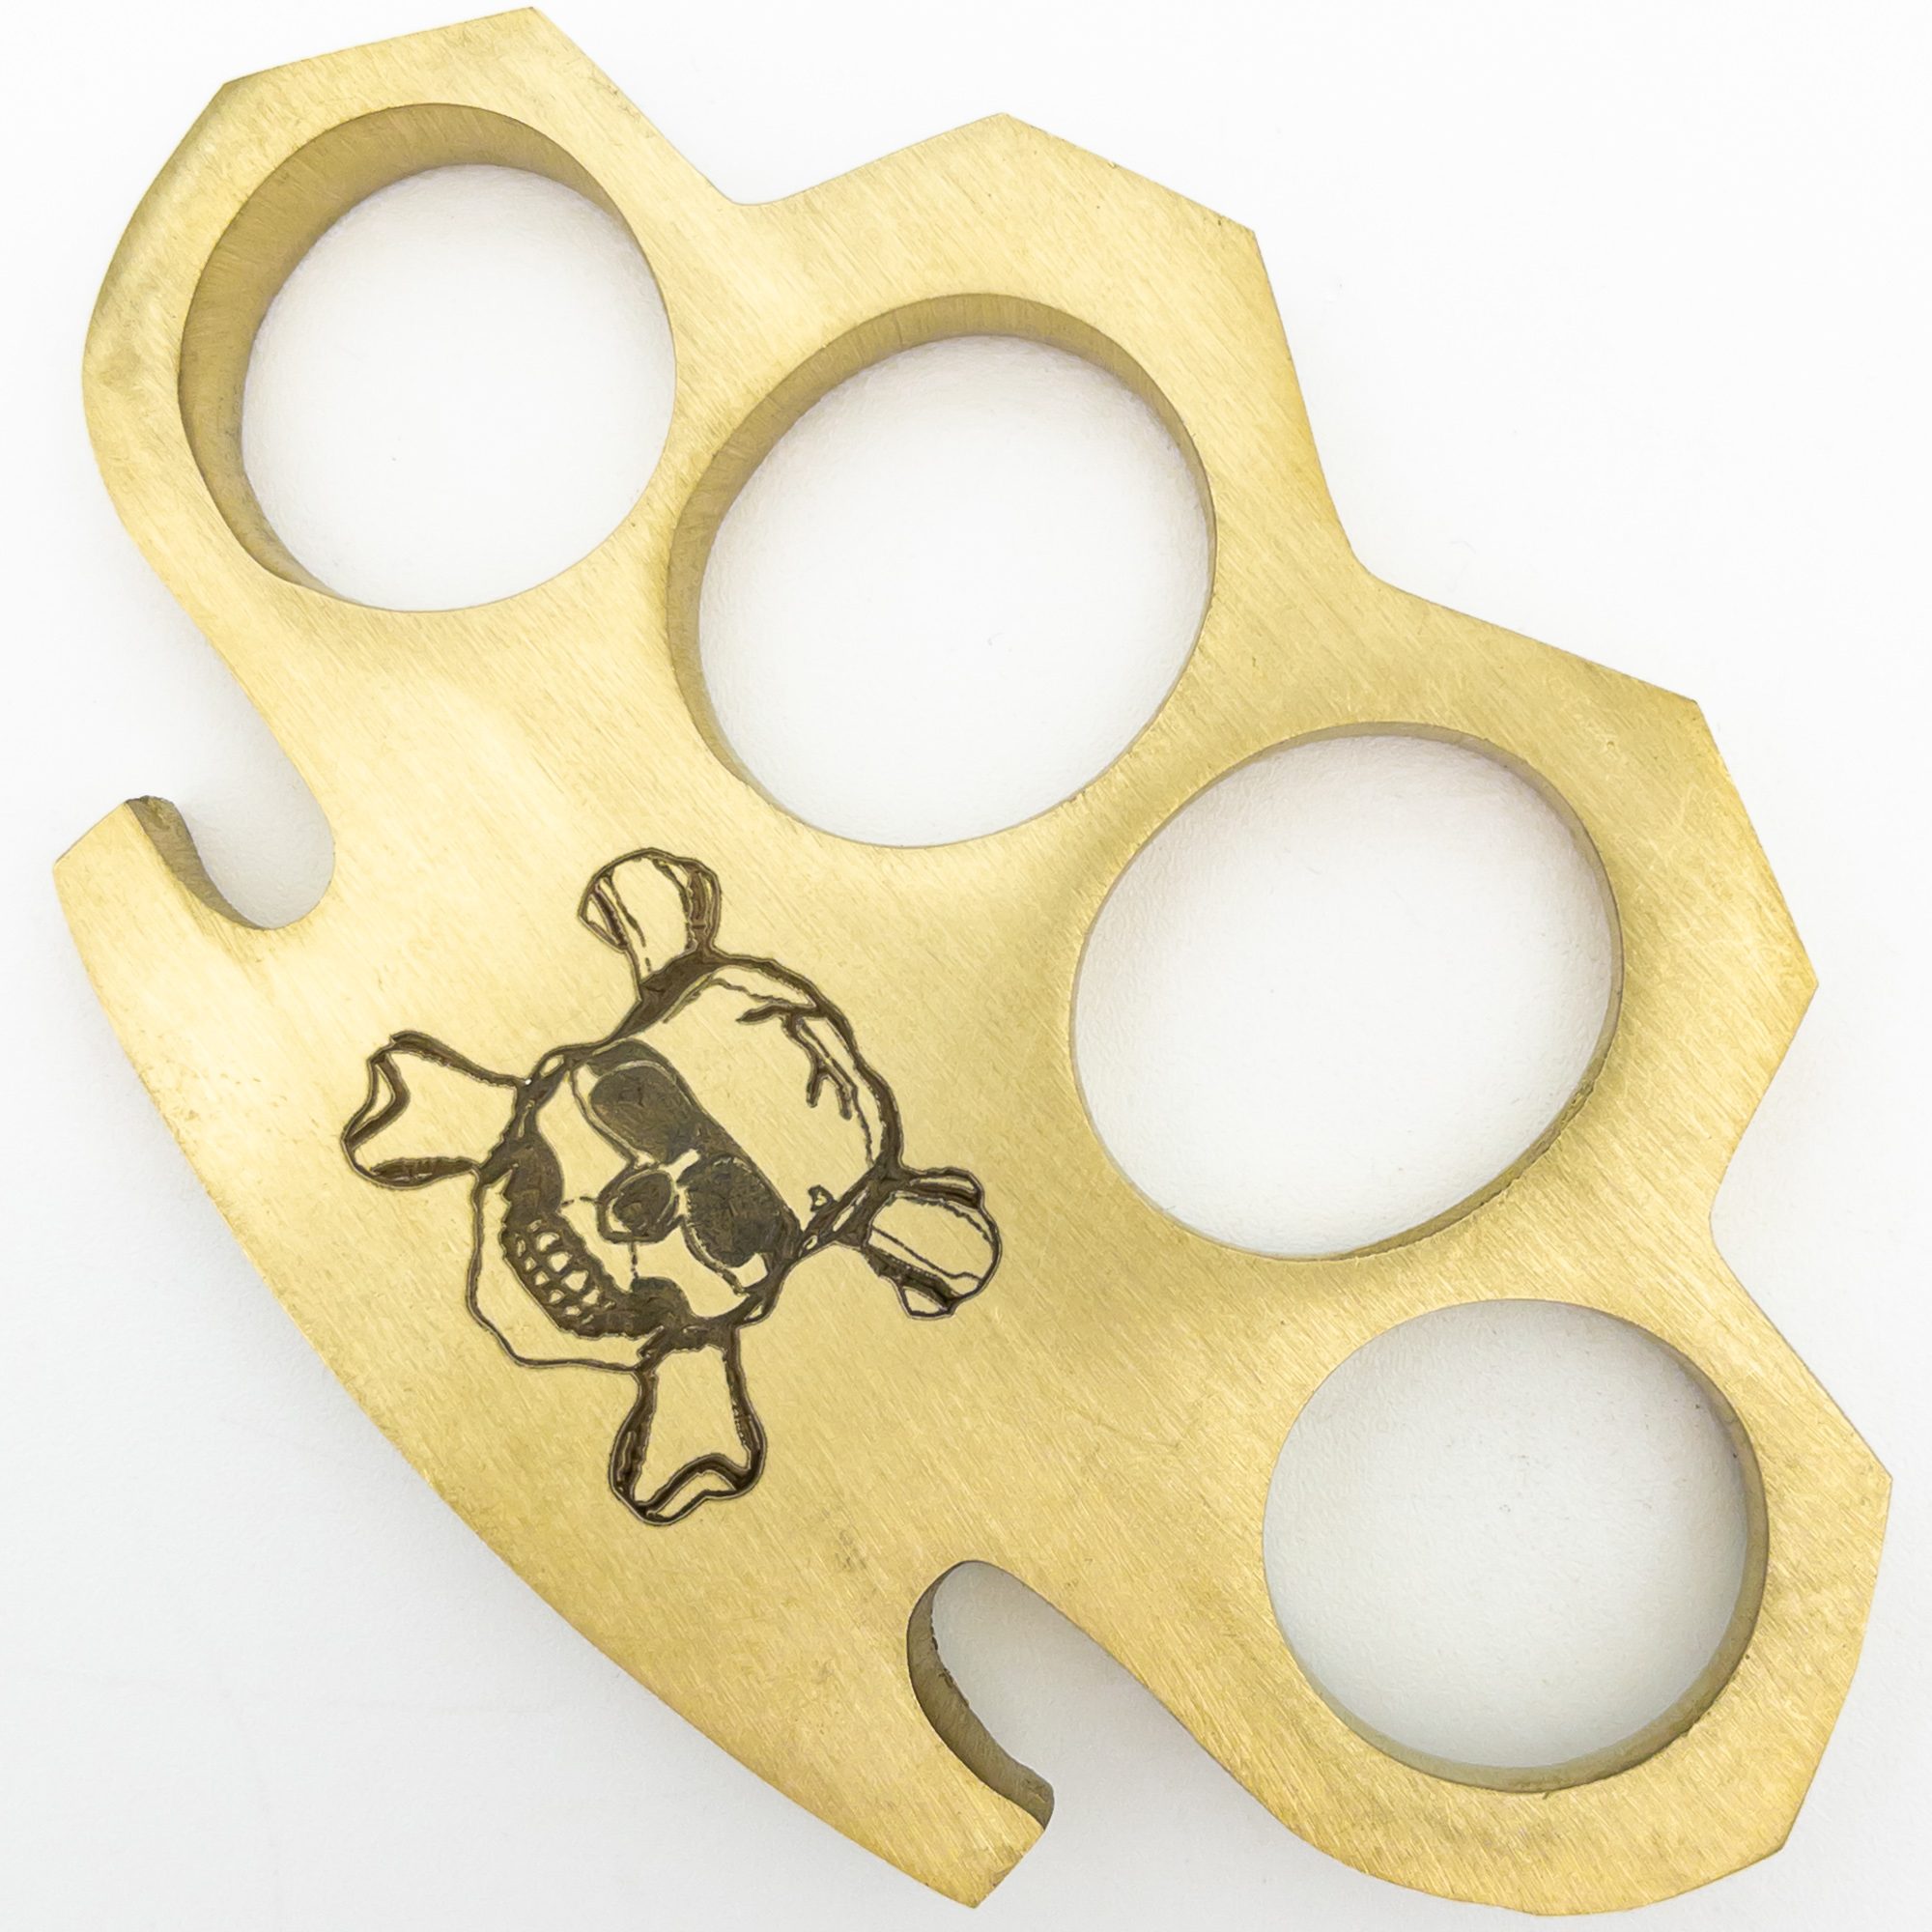 WATCH Over Me 100% Pure Brass Knuckle Paper Weight Accessory